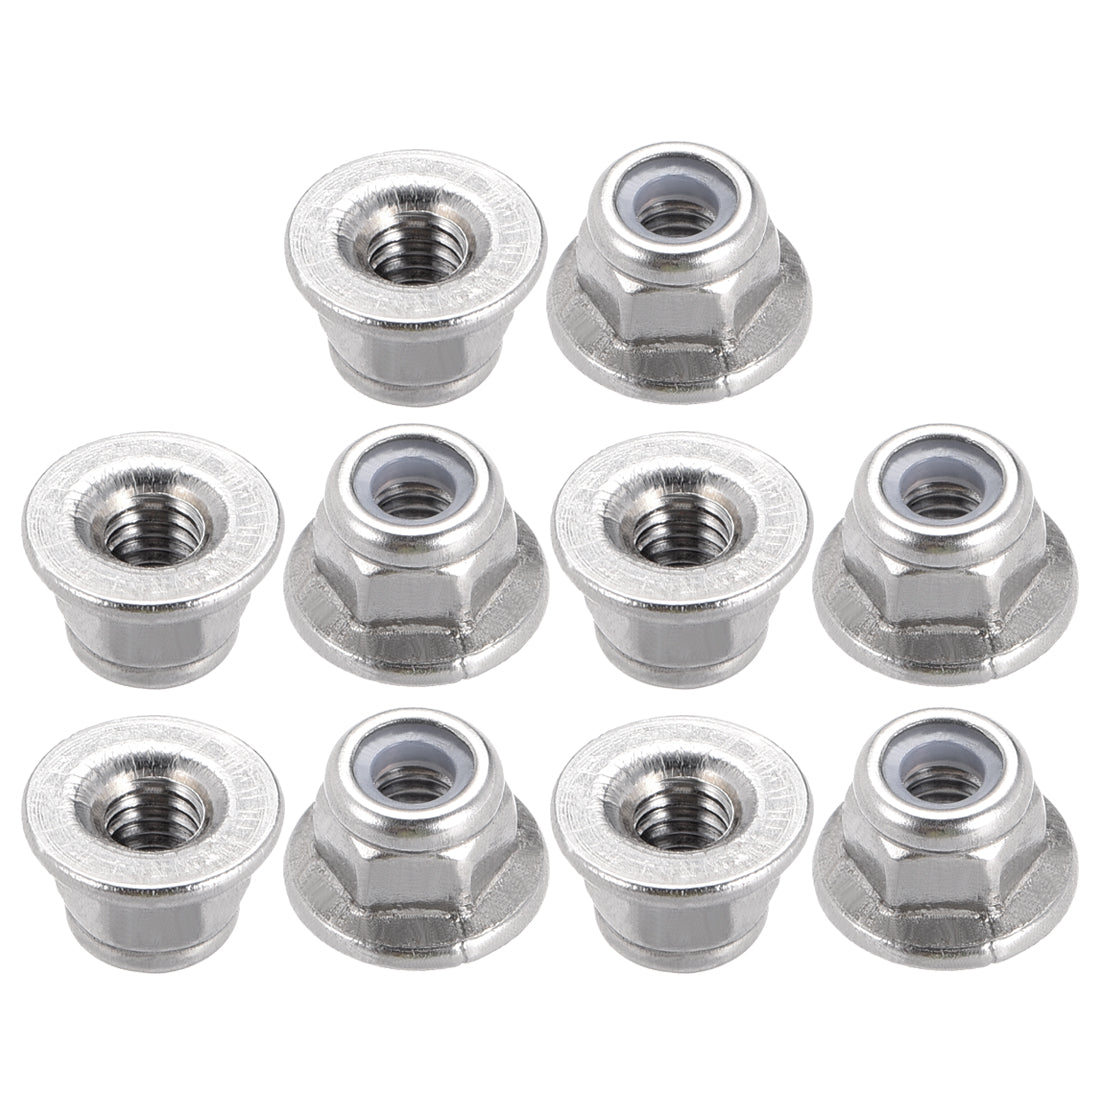 Uxcell Uxcell M4x0.7mm Hex Flange Nylon Insert Lock Nuts, Stainless Steel 304, 10 Pcs